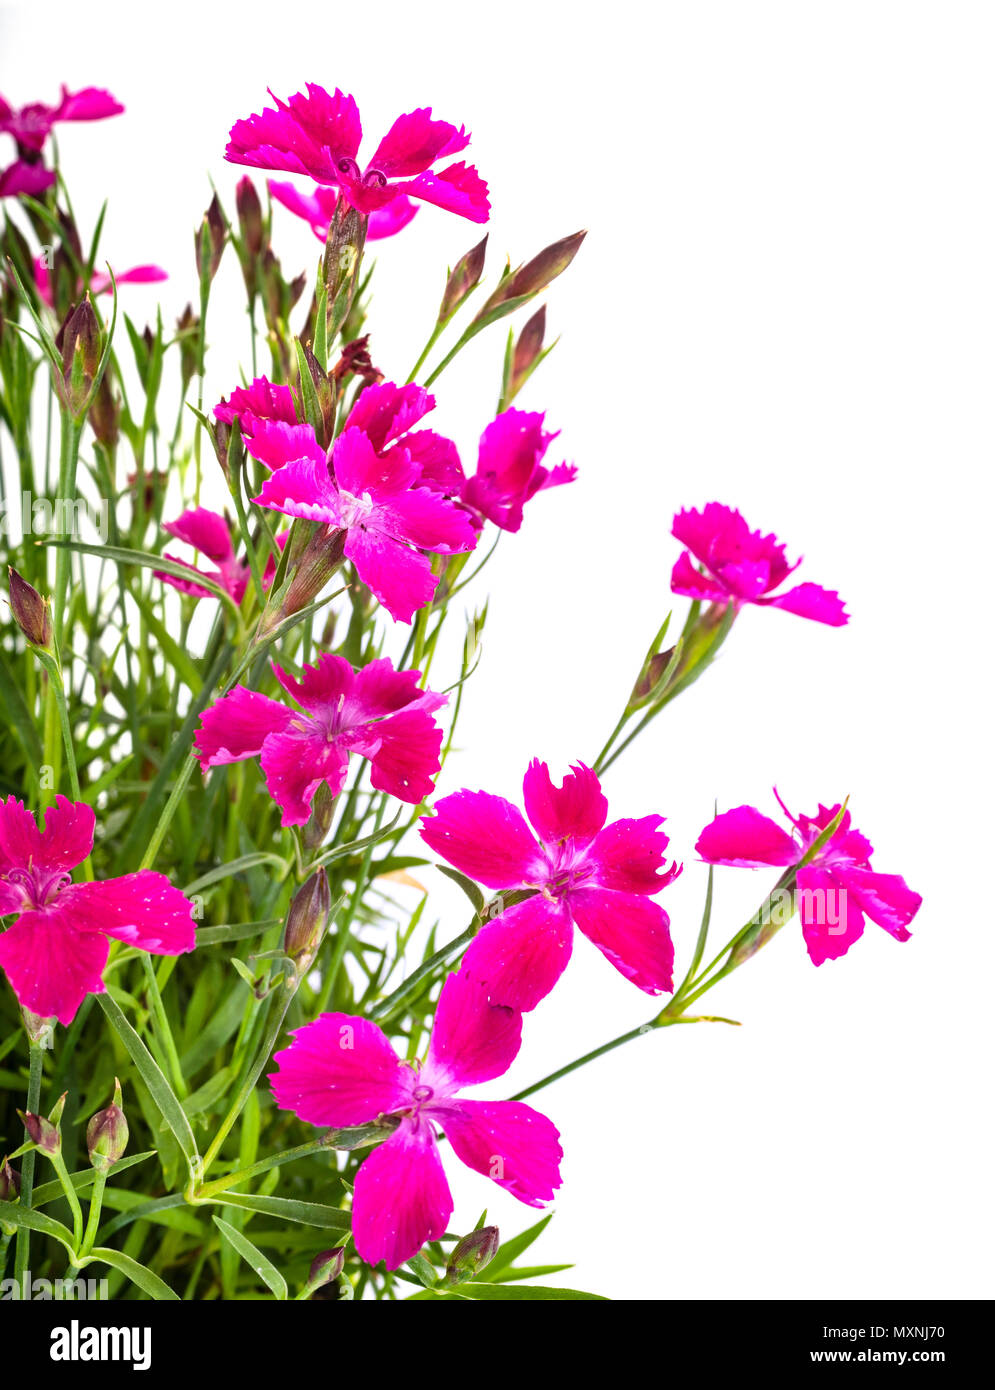 dianthus plant in front of white background Stock Photo